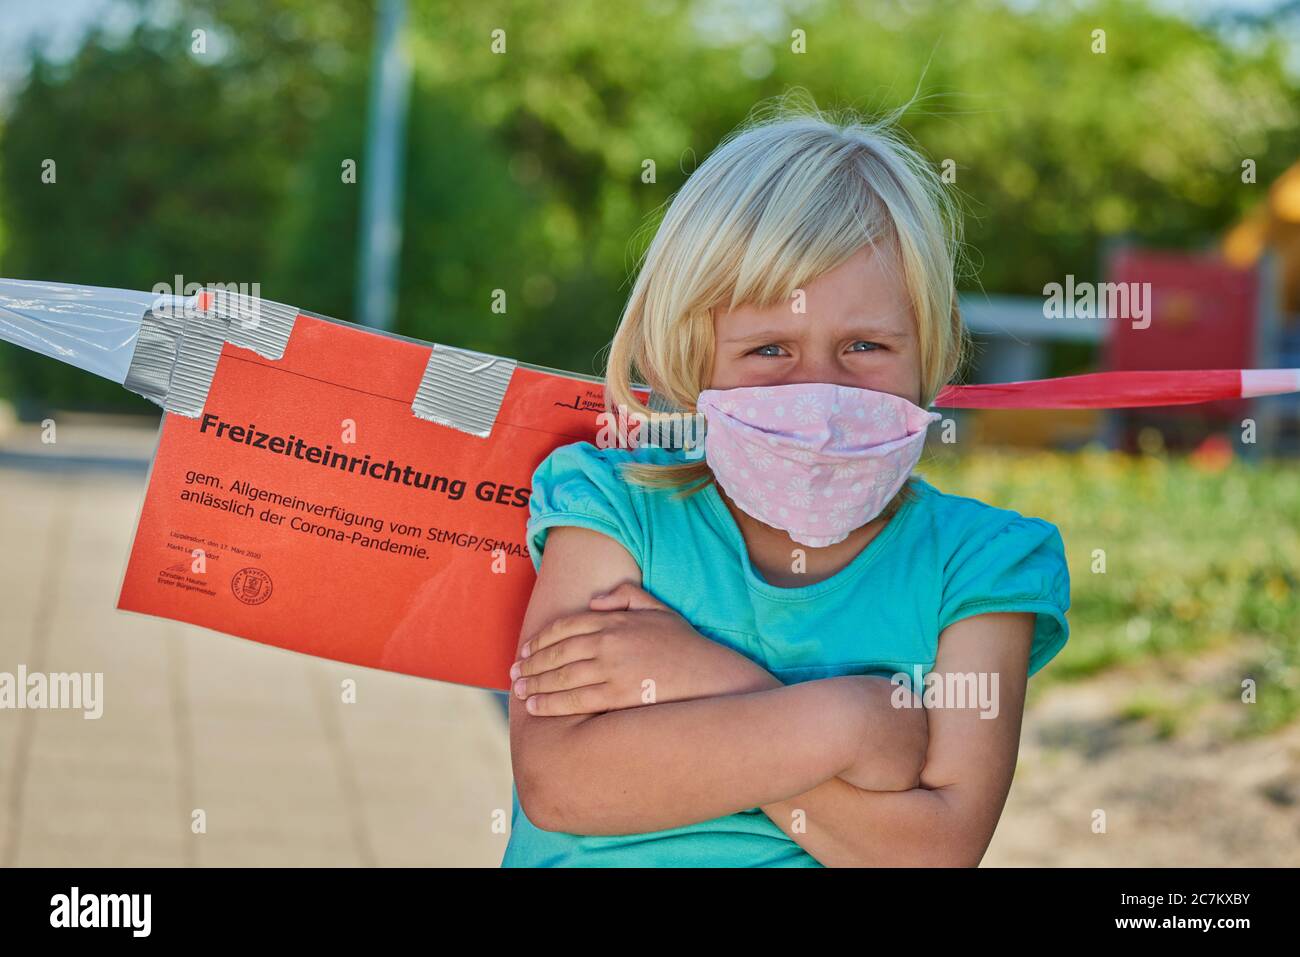 Girl with face mask in front of a playground, Corona crisis, Regensburg, Bavaria, Germany Stock Photo